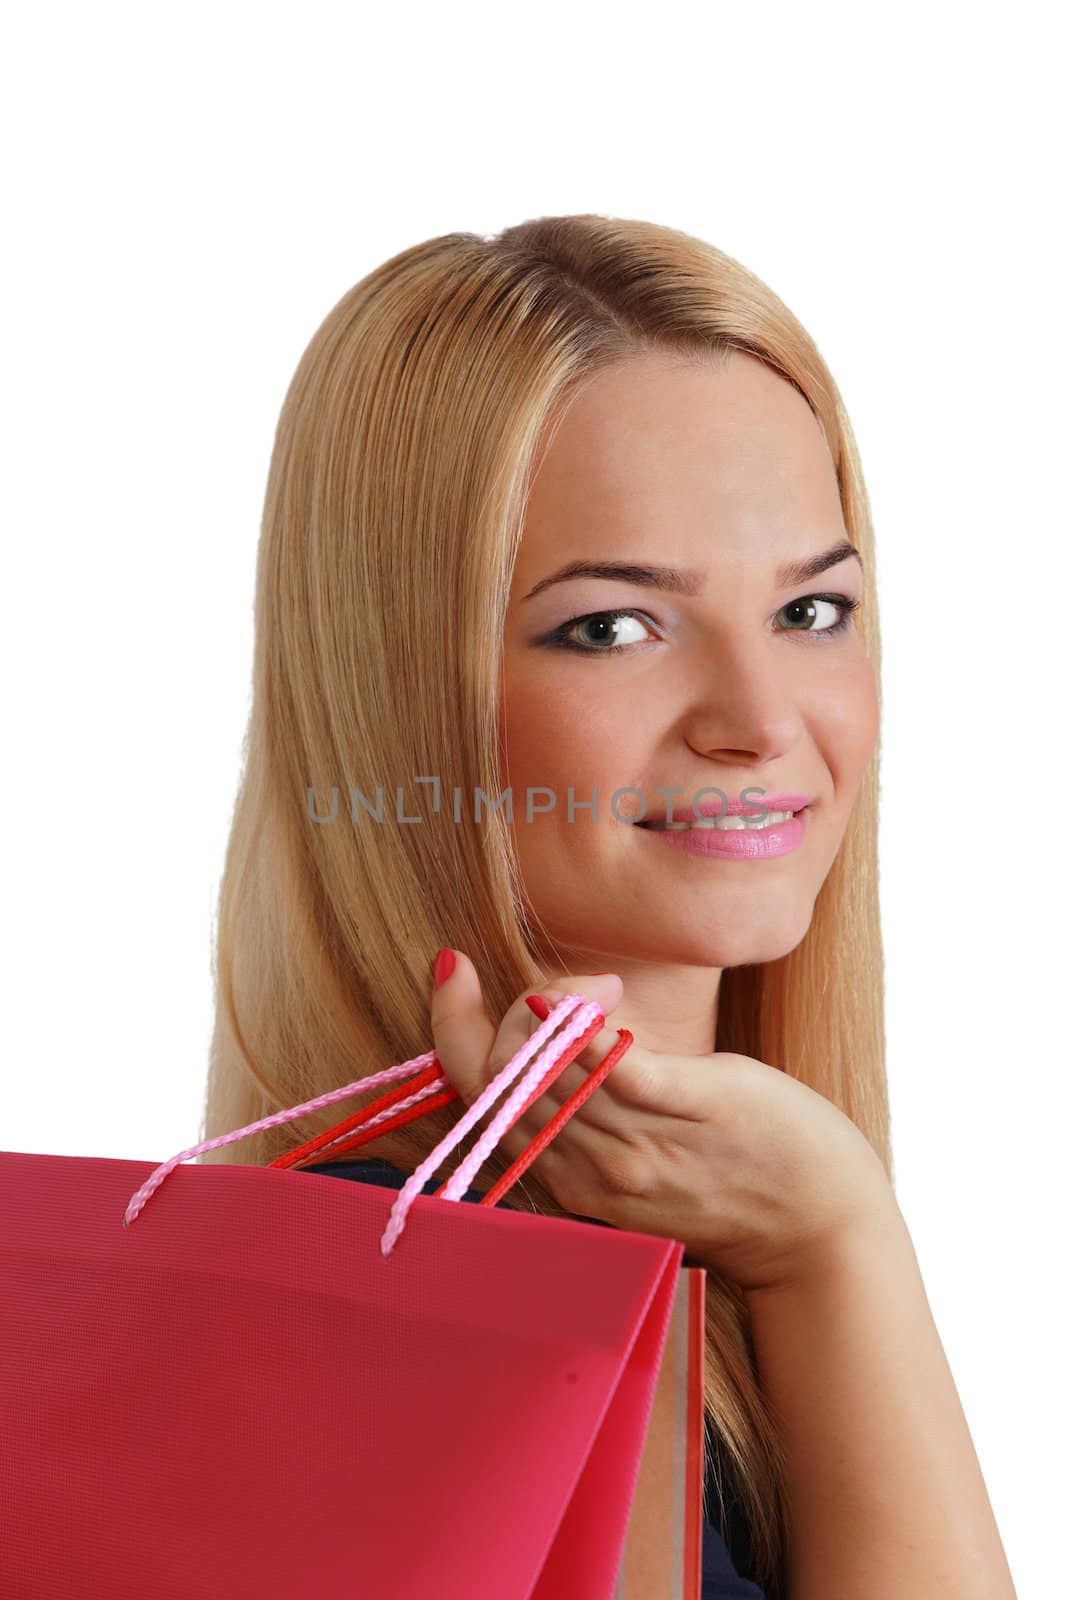 Beuaitufl young blonde woman with a shopping bags over her shoulder.